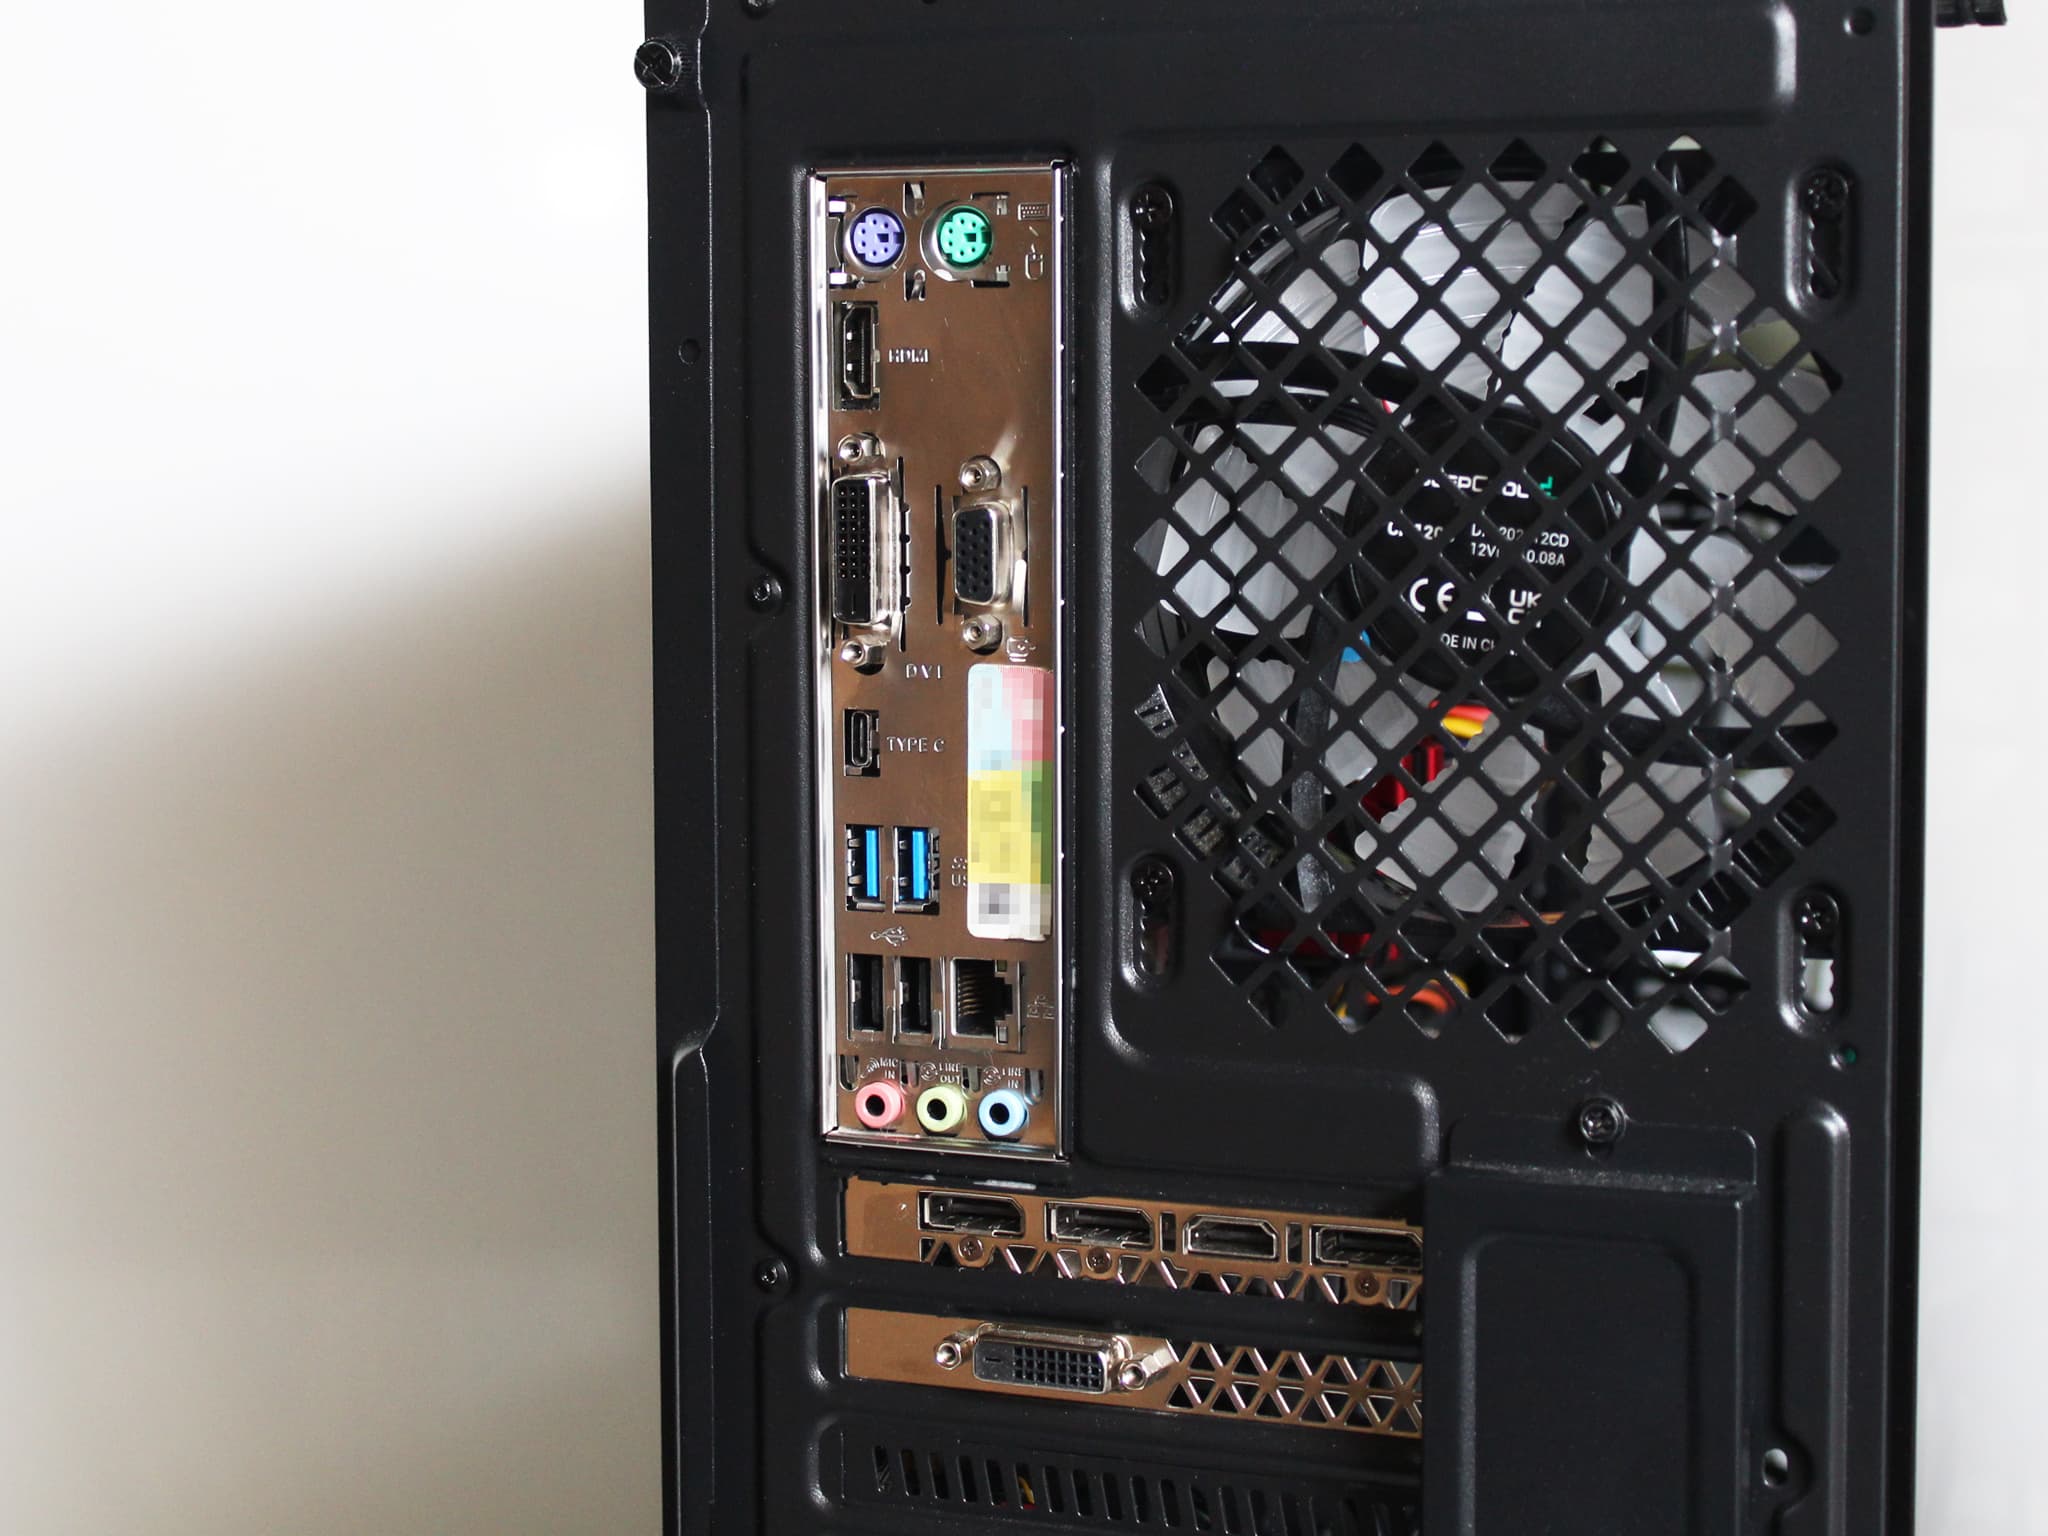 custom gaming tower pc connections rear